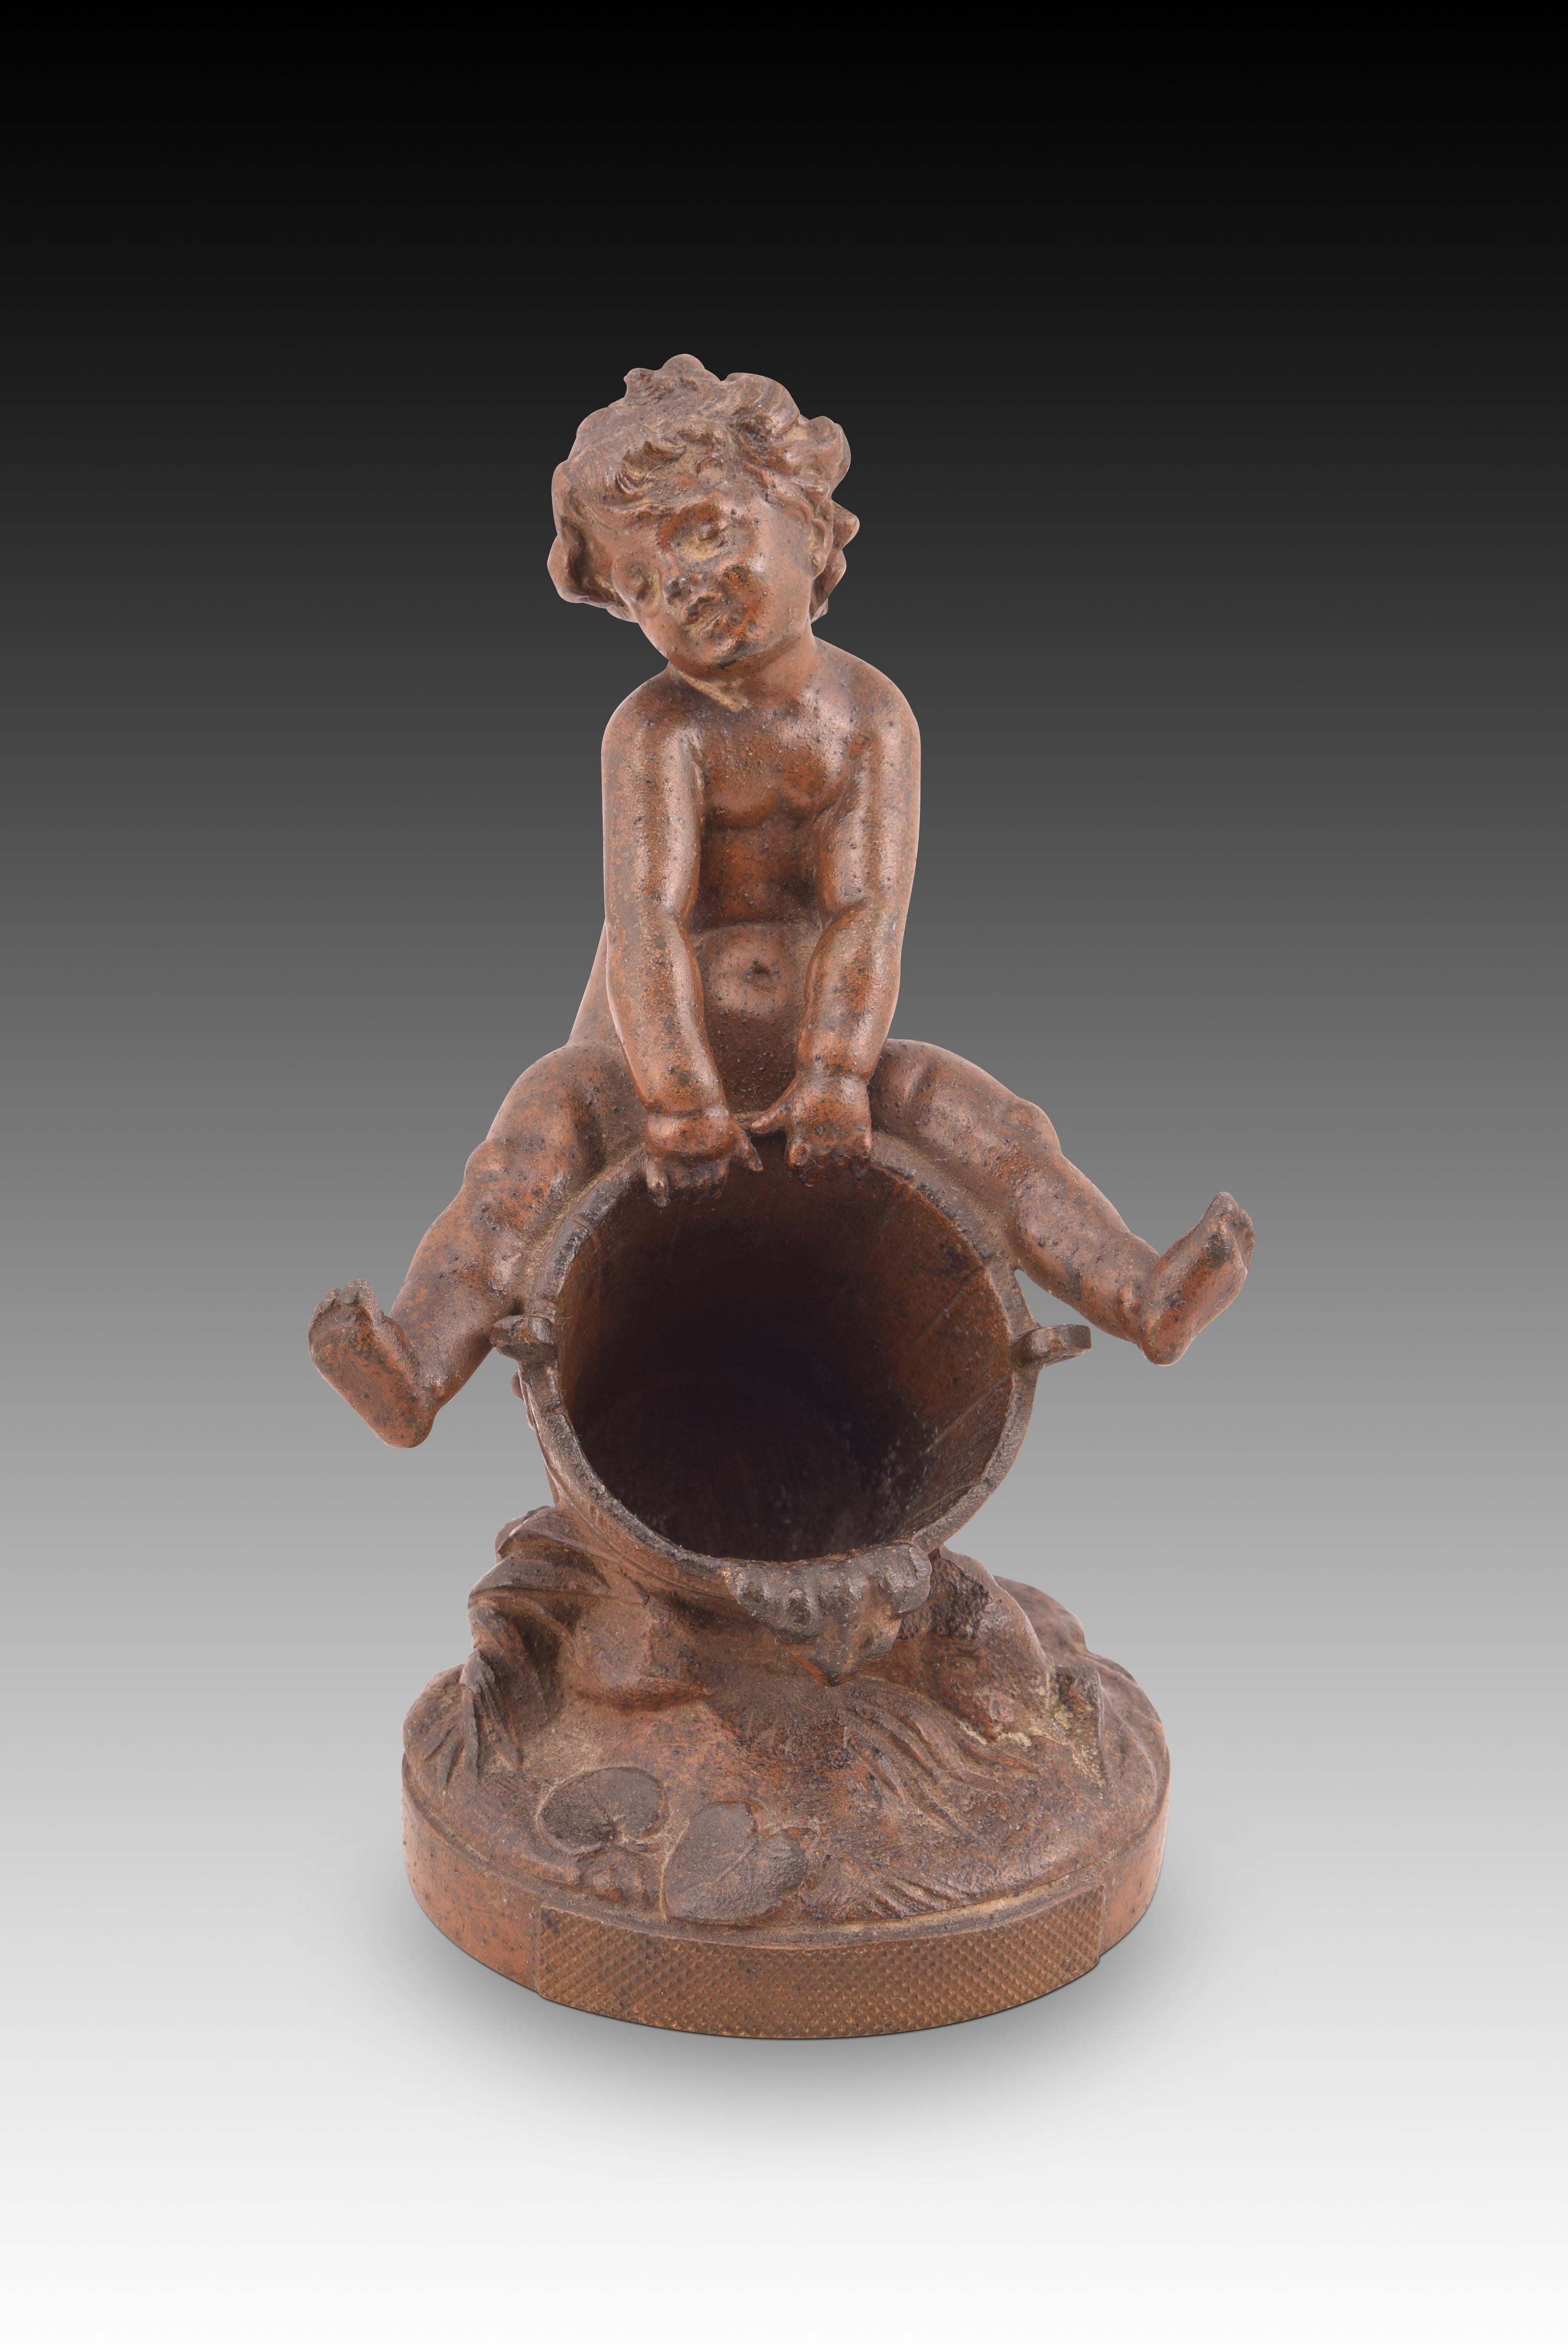 Child on cube. Calamine. Around 1900. 
Figure with a circular base that shows a child sitting astride a cube. Stylistically, the piece presents common characteristics in small French school sculptures from the second half of the 19th century.